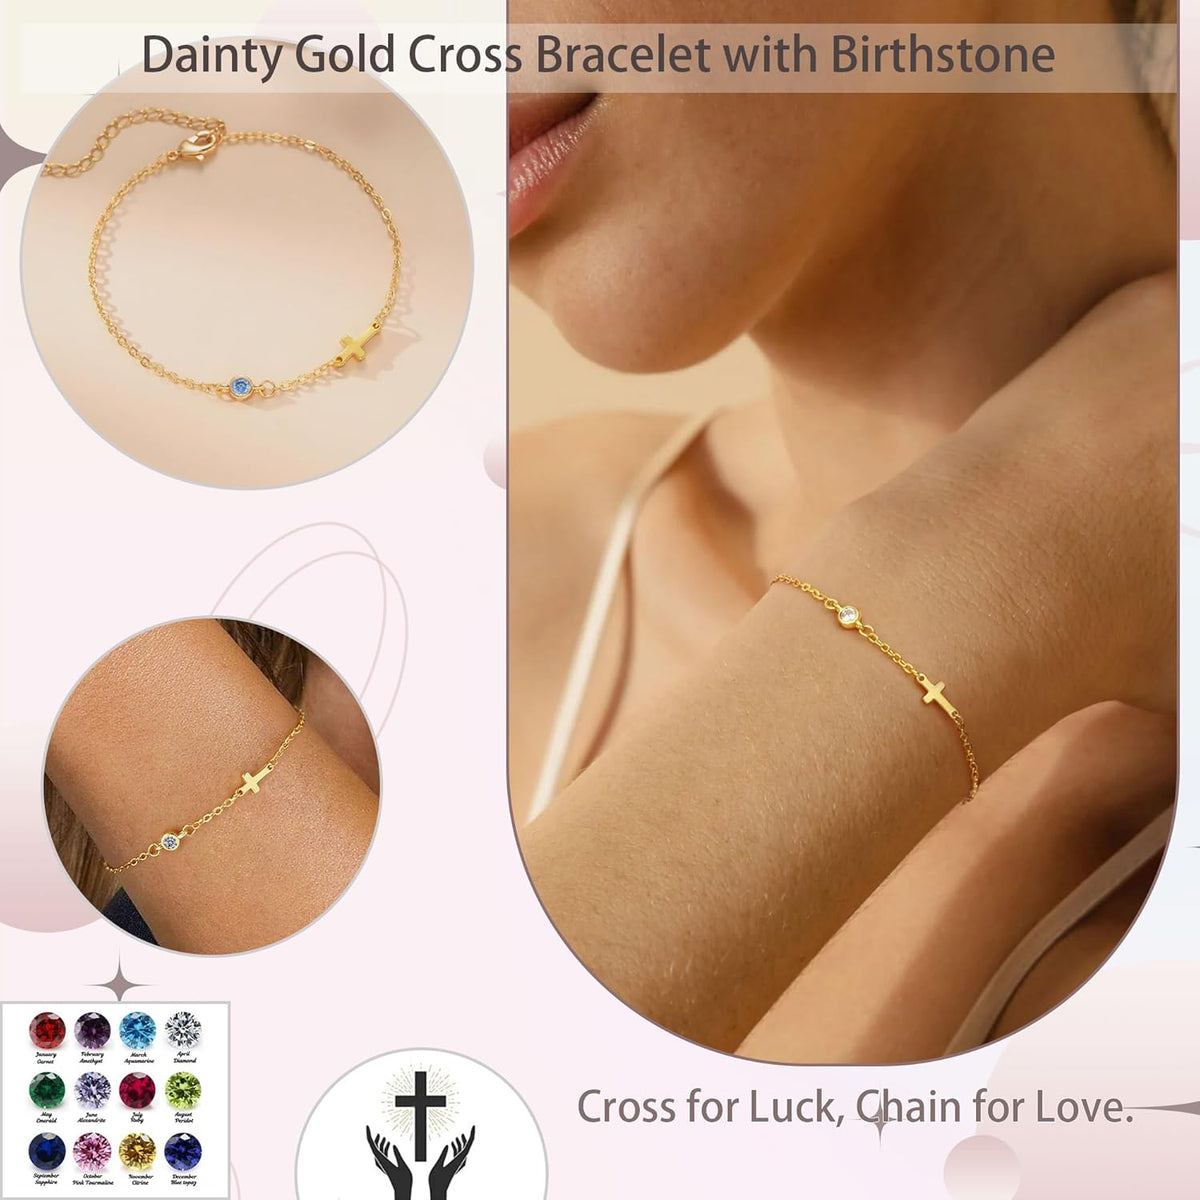 Cross Bracelet with Birthstone, Dainty Gold Birthstone Bracelets for Women Birthday Gifts Christian Gifts for Her Religious Faith Baptism Confirmation Gifts for Teen Girls Christmas Jewelry for Sister Daughter Granddaughter Girlfriend